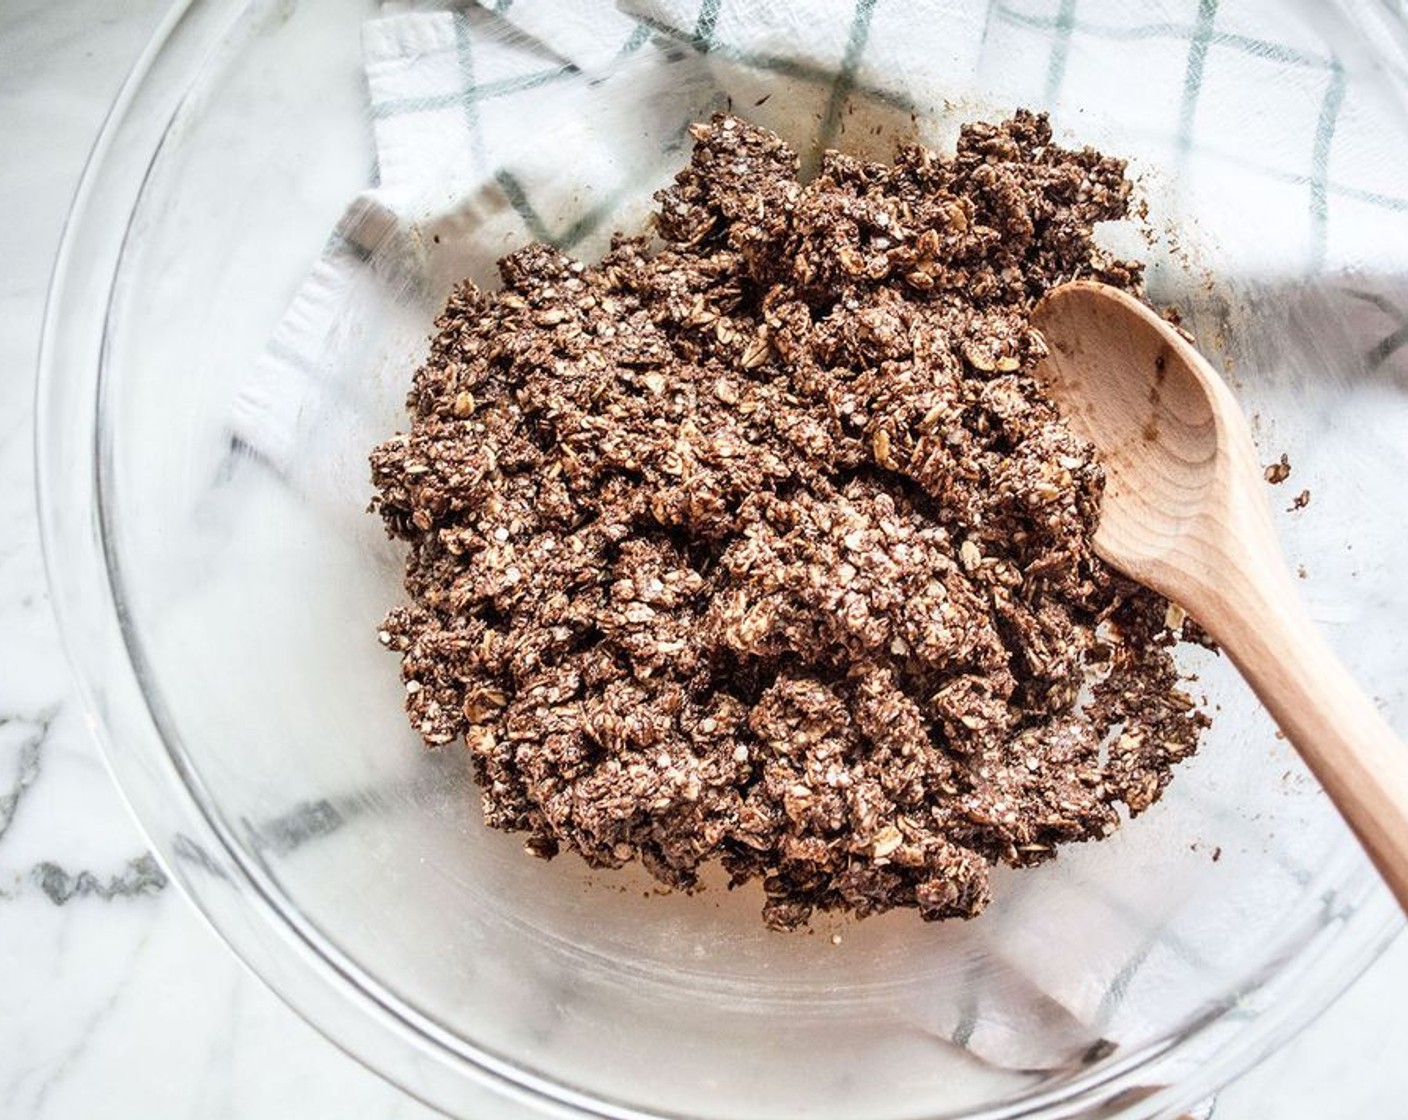 step 2 Remove from heat and stir in Vanilla Extract (1/2 Tbsp), Toasted Quinoa Flakes (2 cups), Old Fashioned Rolled Oats (2 cups), Dark Chocolate Chips (3/4 cup) and Powdered Peanut Butter (1/4 cup). Stir until toasted quinoa flakes and rolled oats are are fully coated.